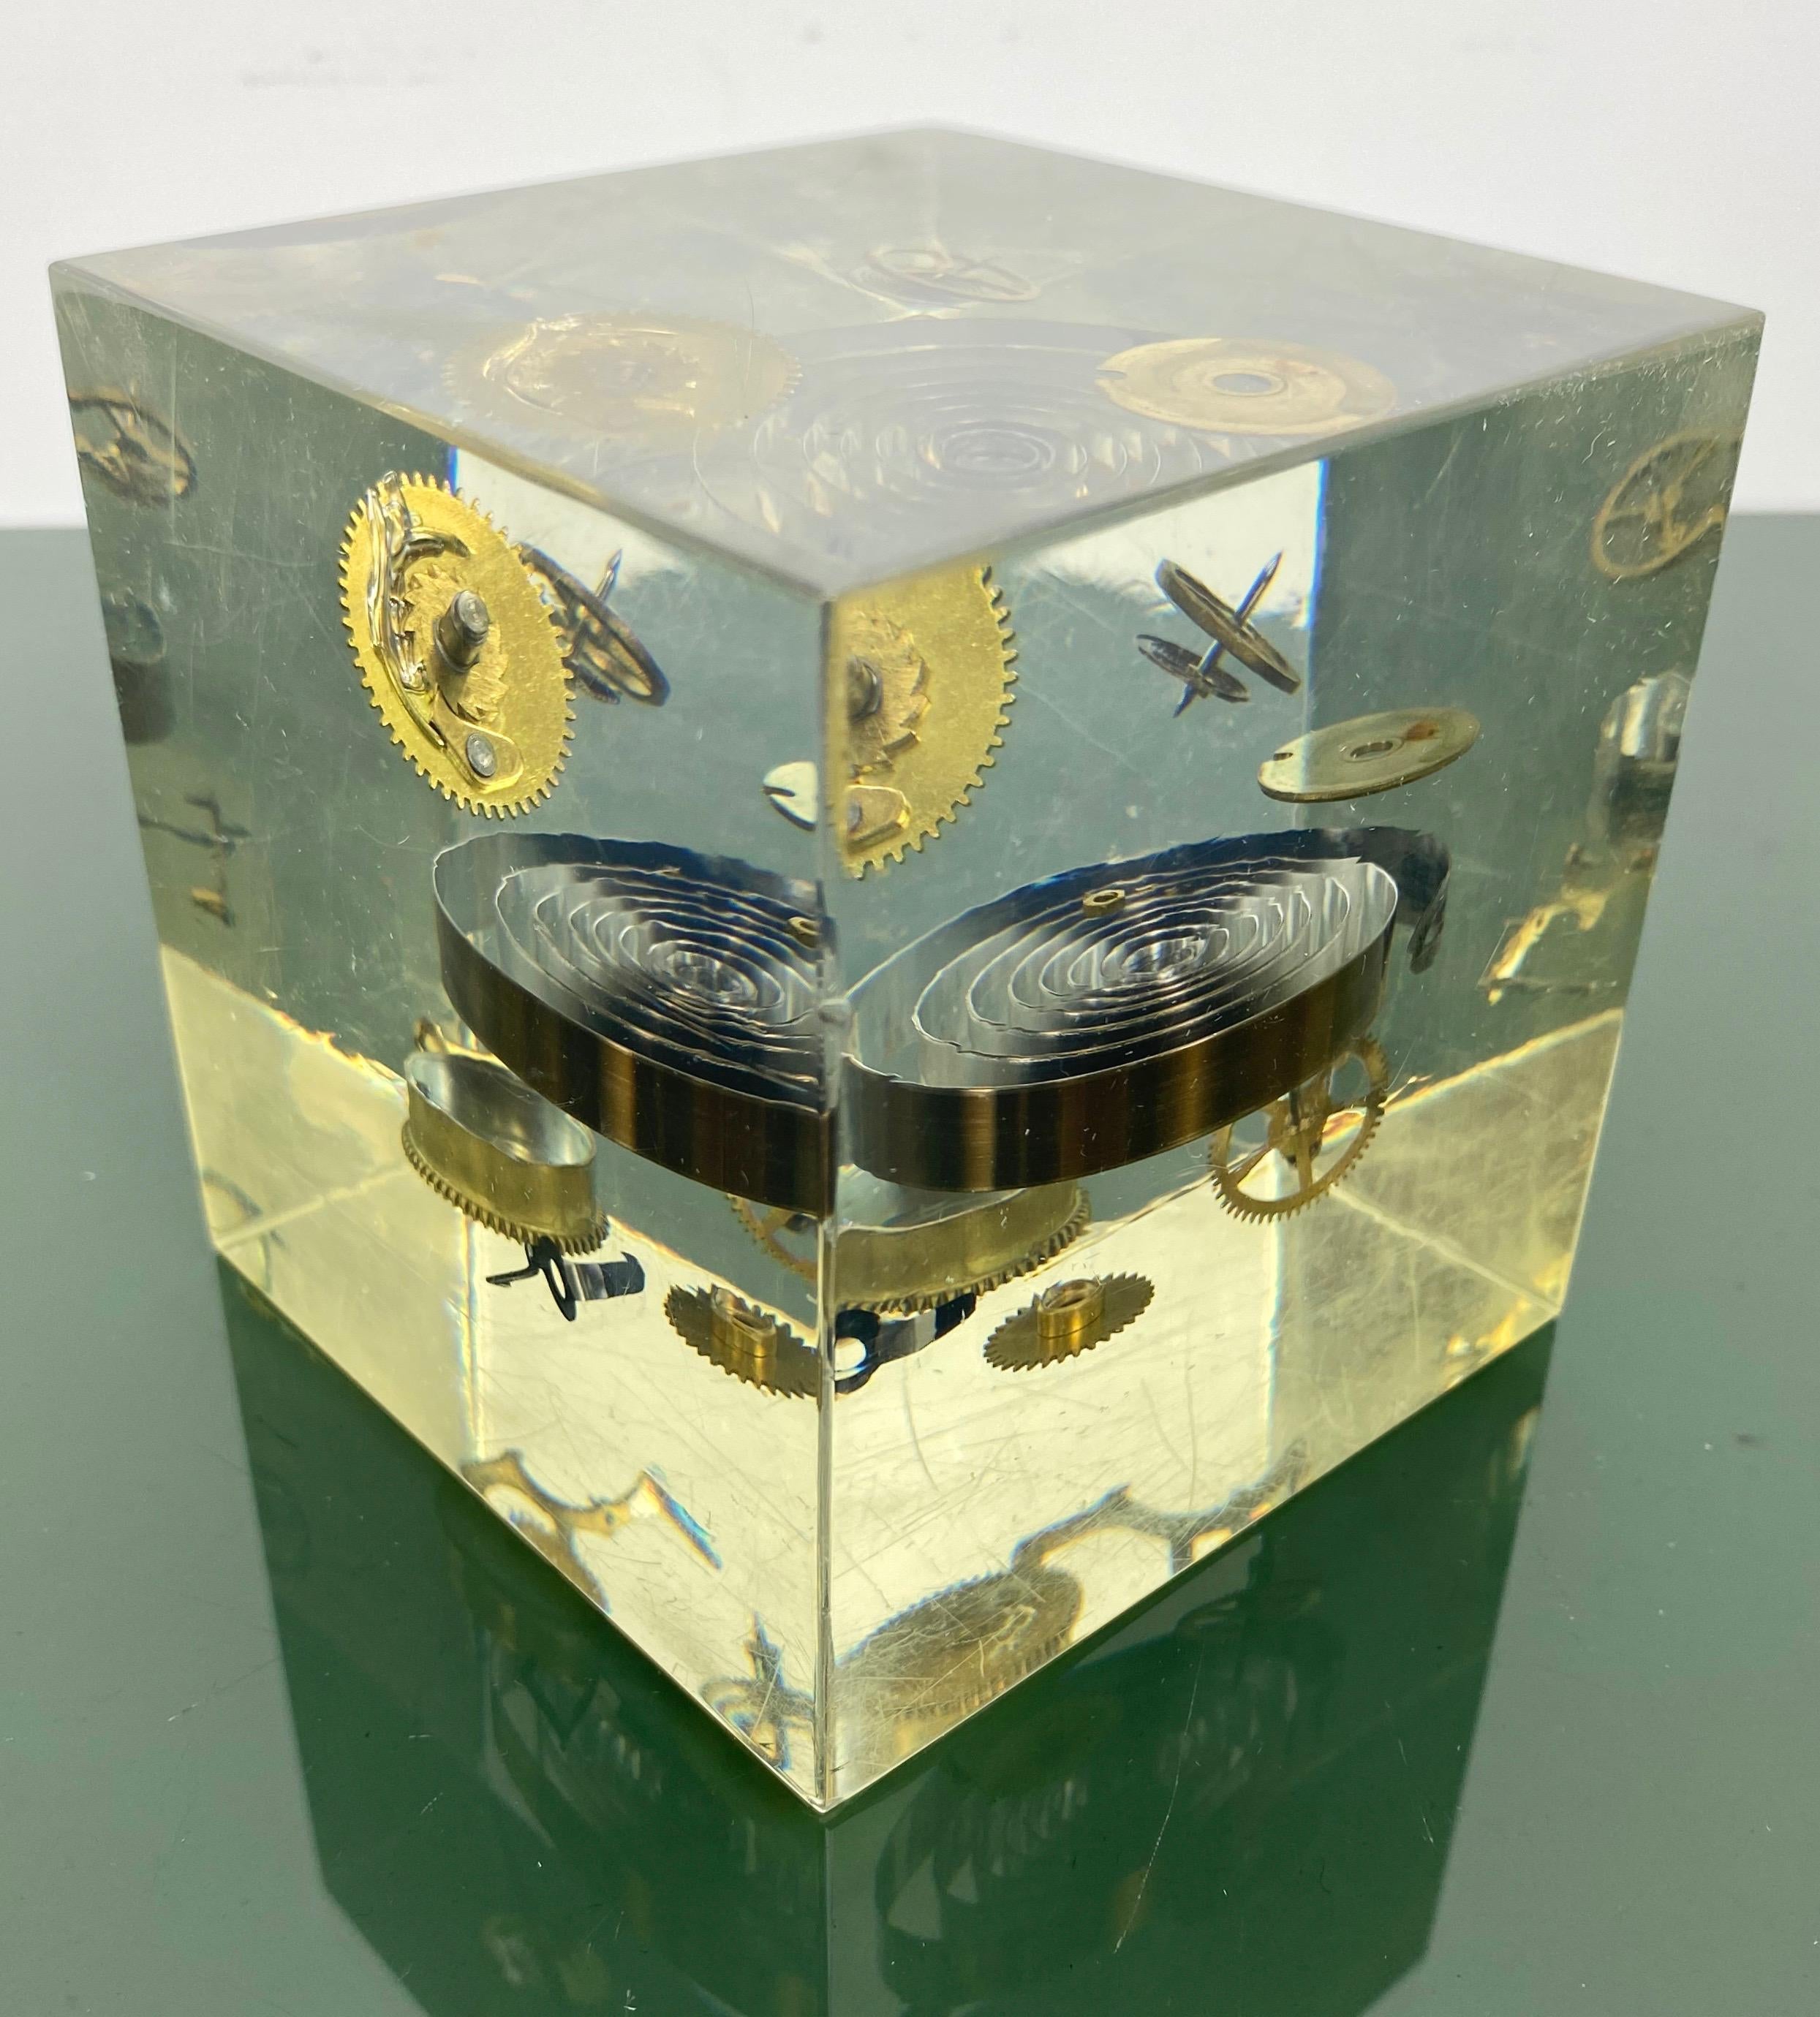 French Acrylic Cube Sculpture Paperweight with Clock Parts by Pierre Giraudon, 1970s For Sale